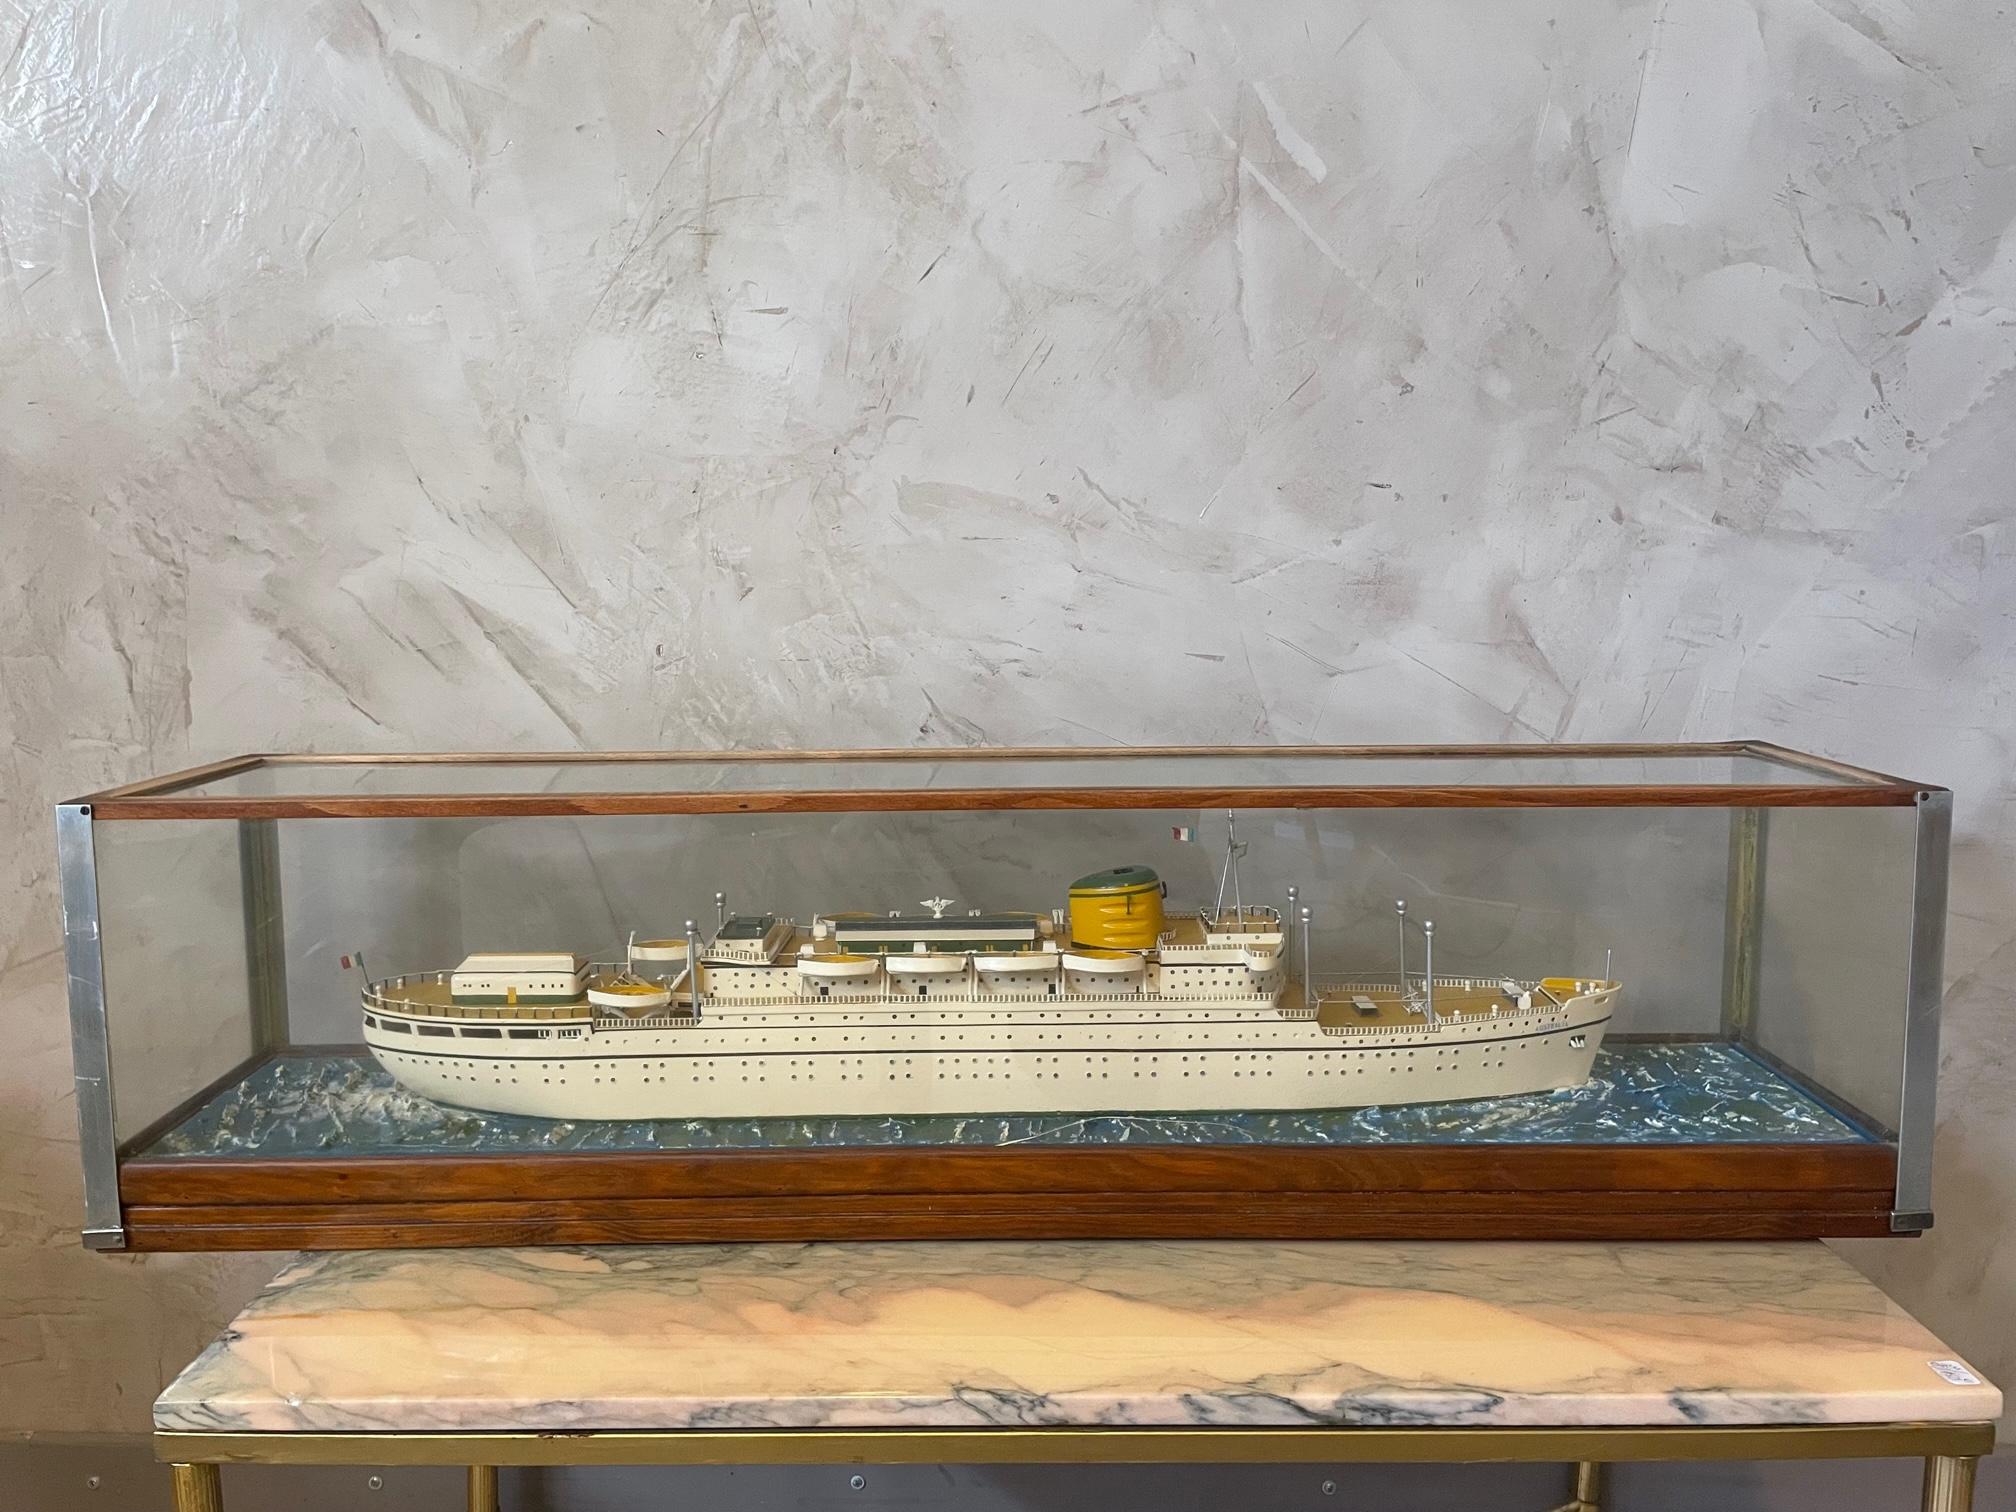 20th Century model representing the Australia ship. Made with plastic and presents under a glass. (Some cracks on the glass).